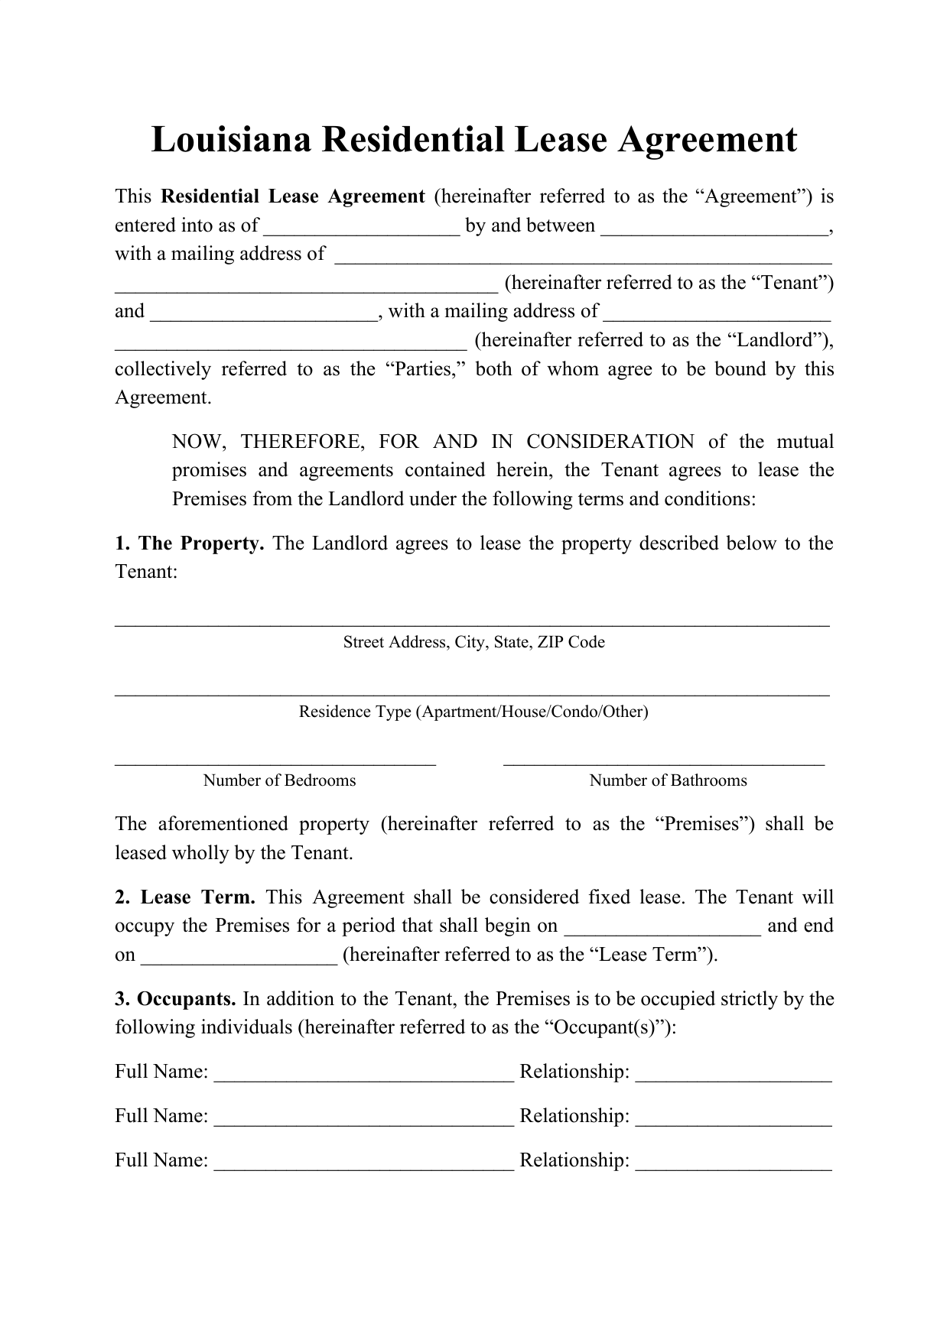 louisiana-residential-lease-agreement-template-download-printable-pdf